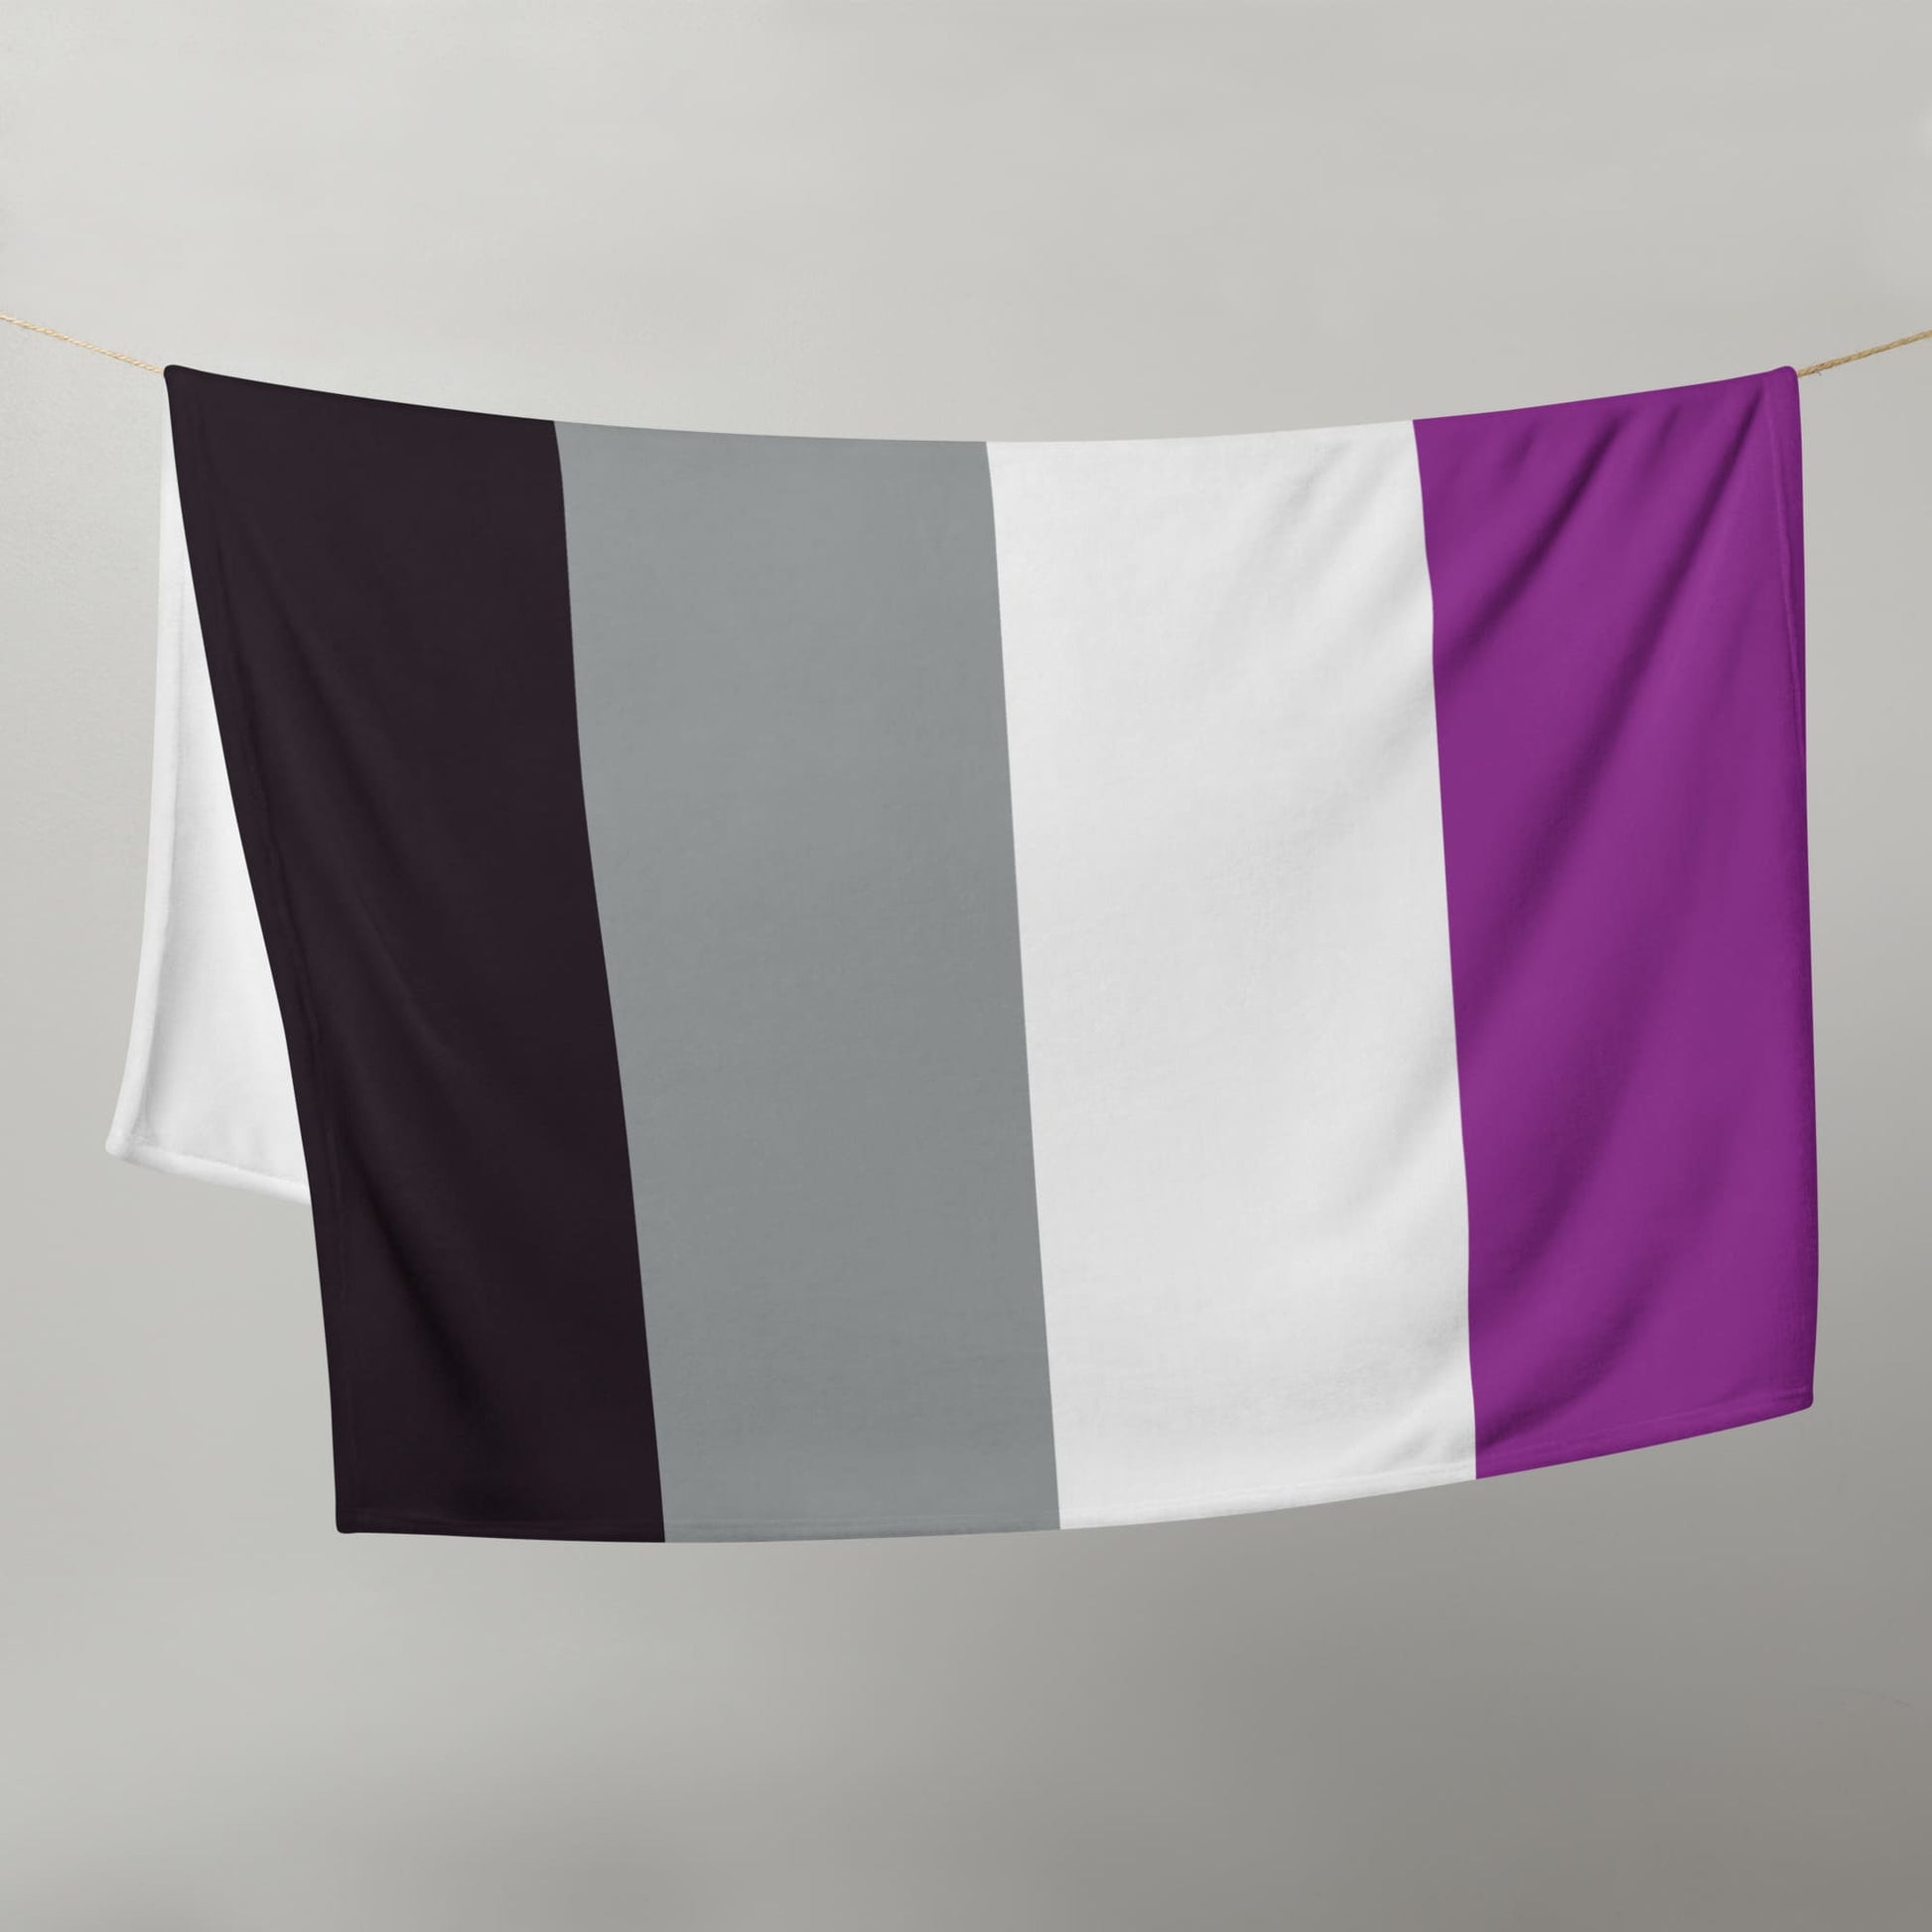 asexual blanket hanging